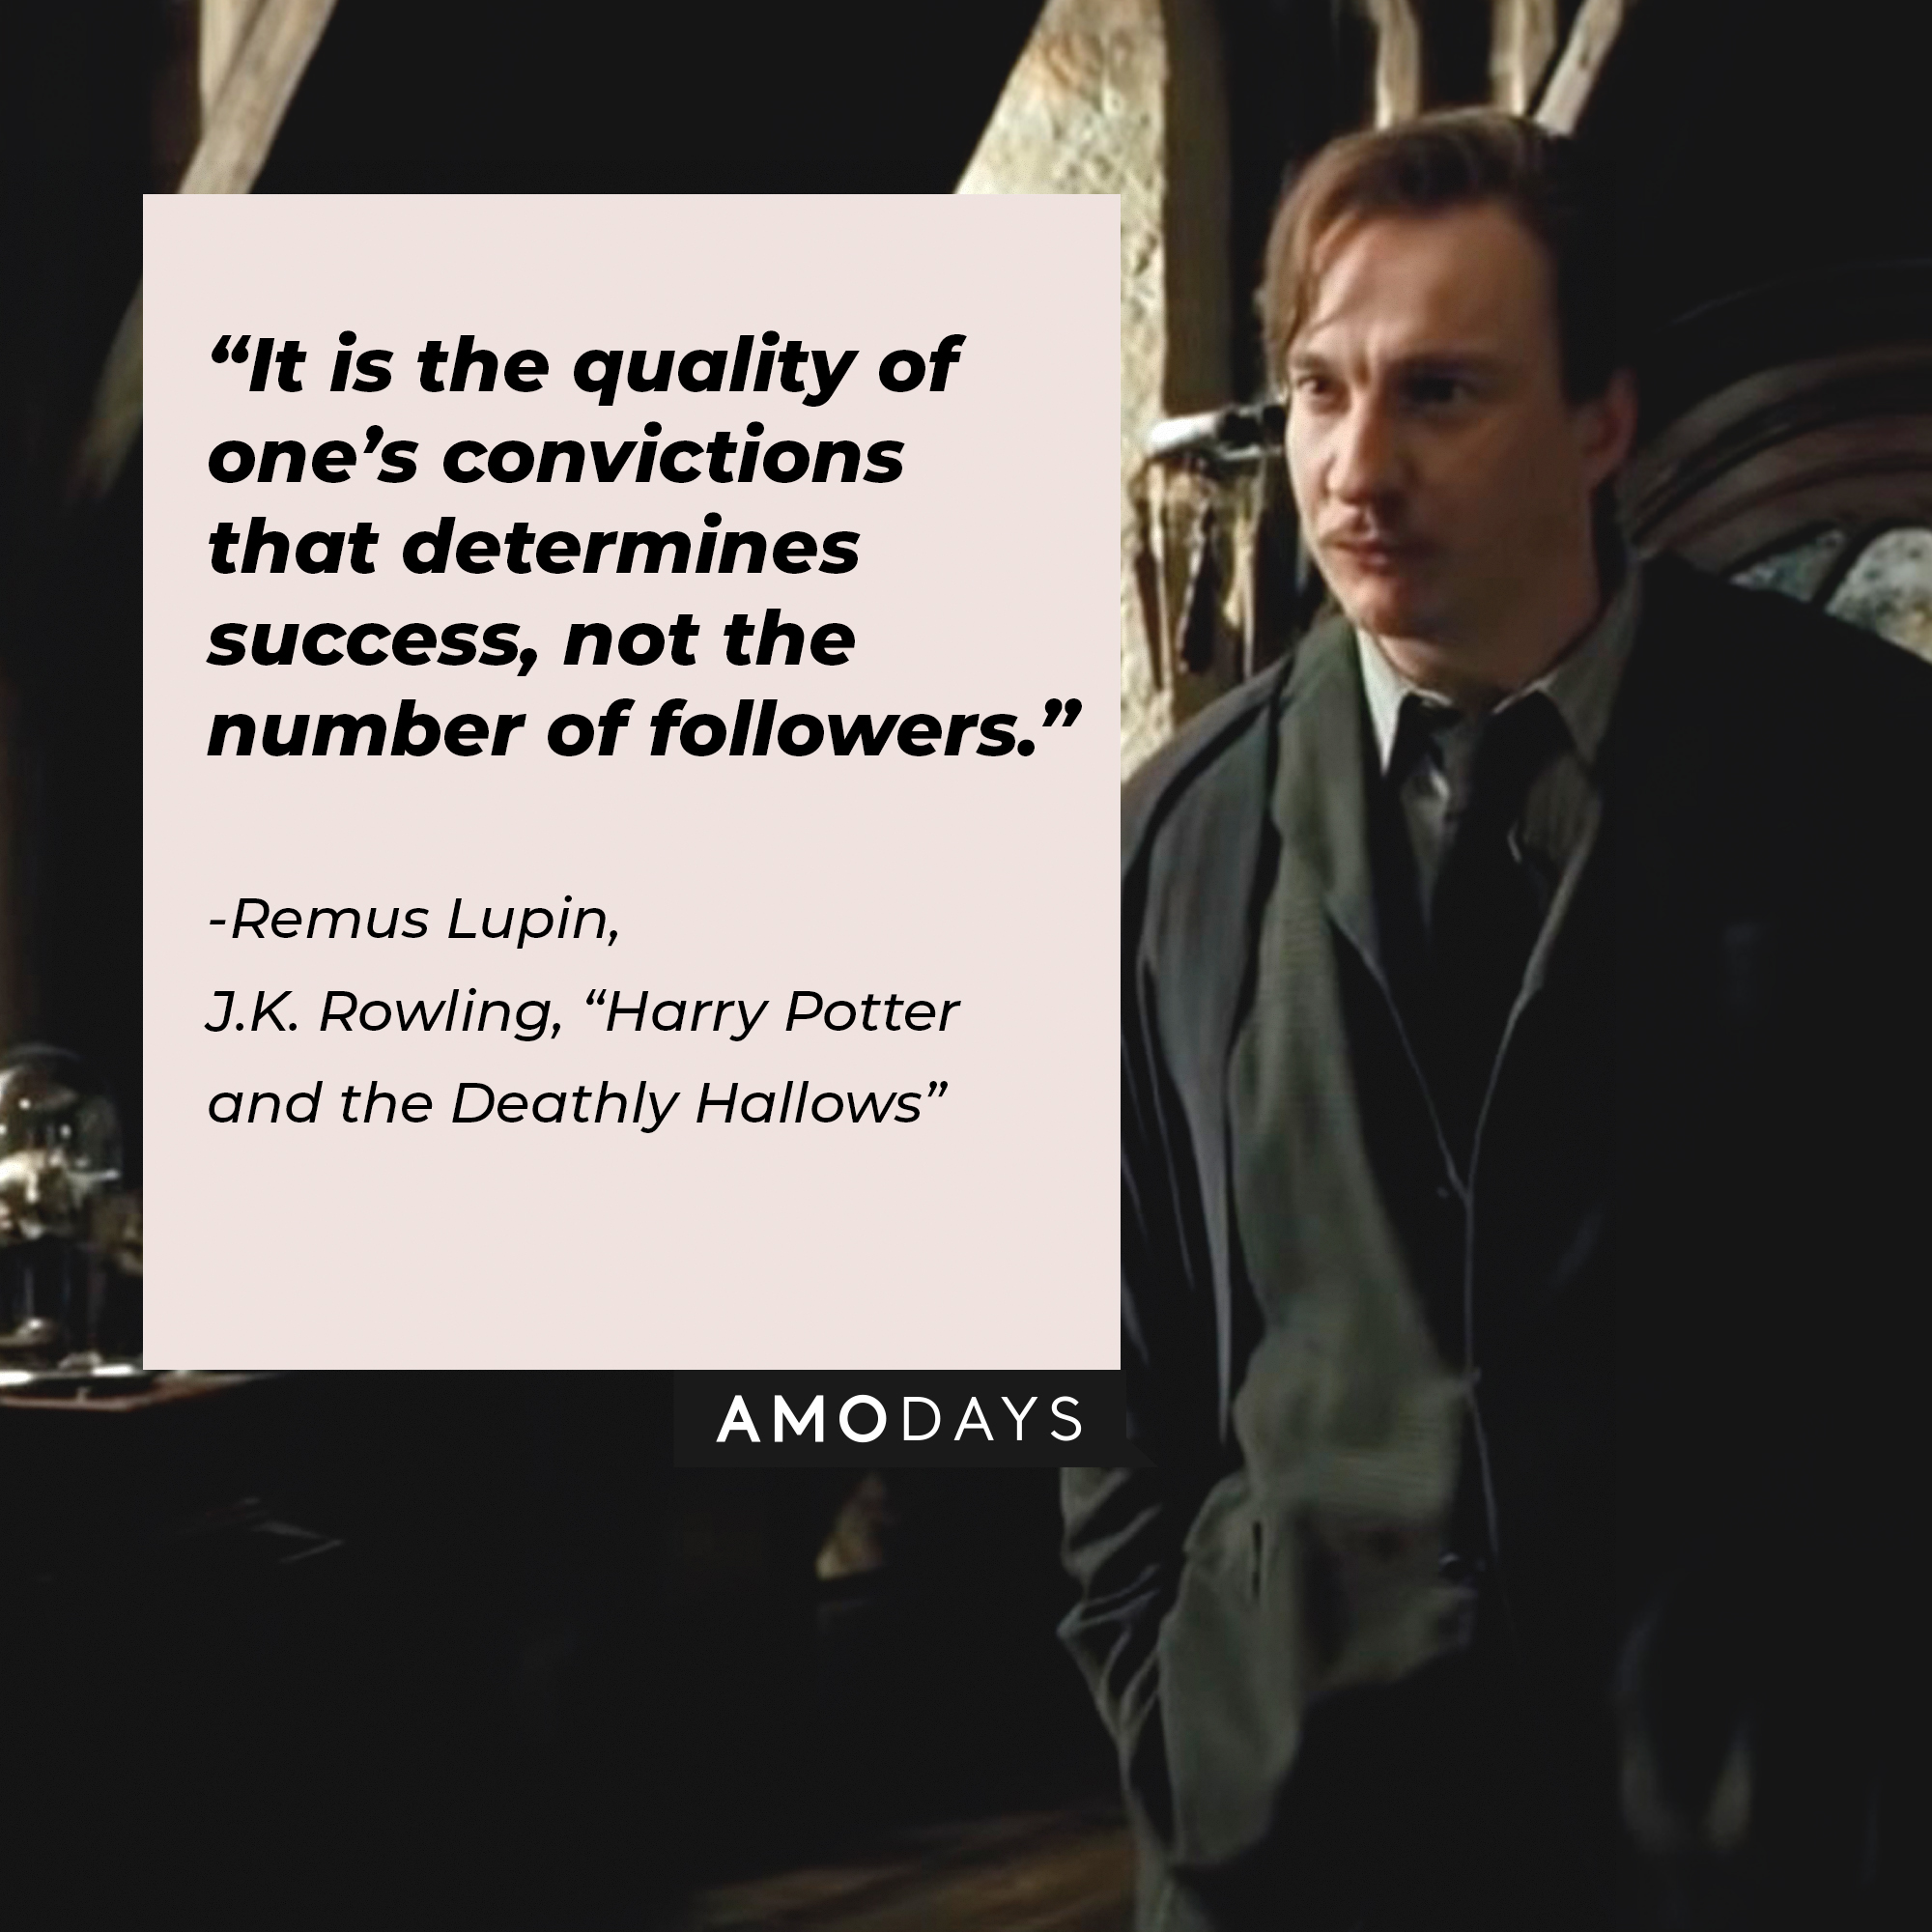 A picture of Remus Lupin with his quote: “It is the quality of one’s convictions that determines success, not the number of followers.” | Source: youtube.com/WarnerBrosPictures